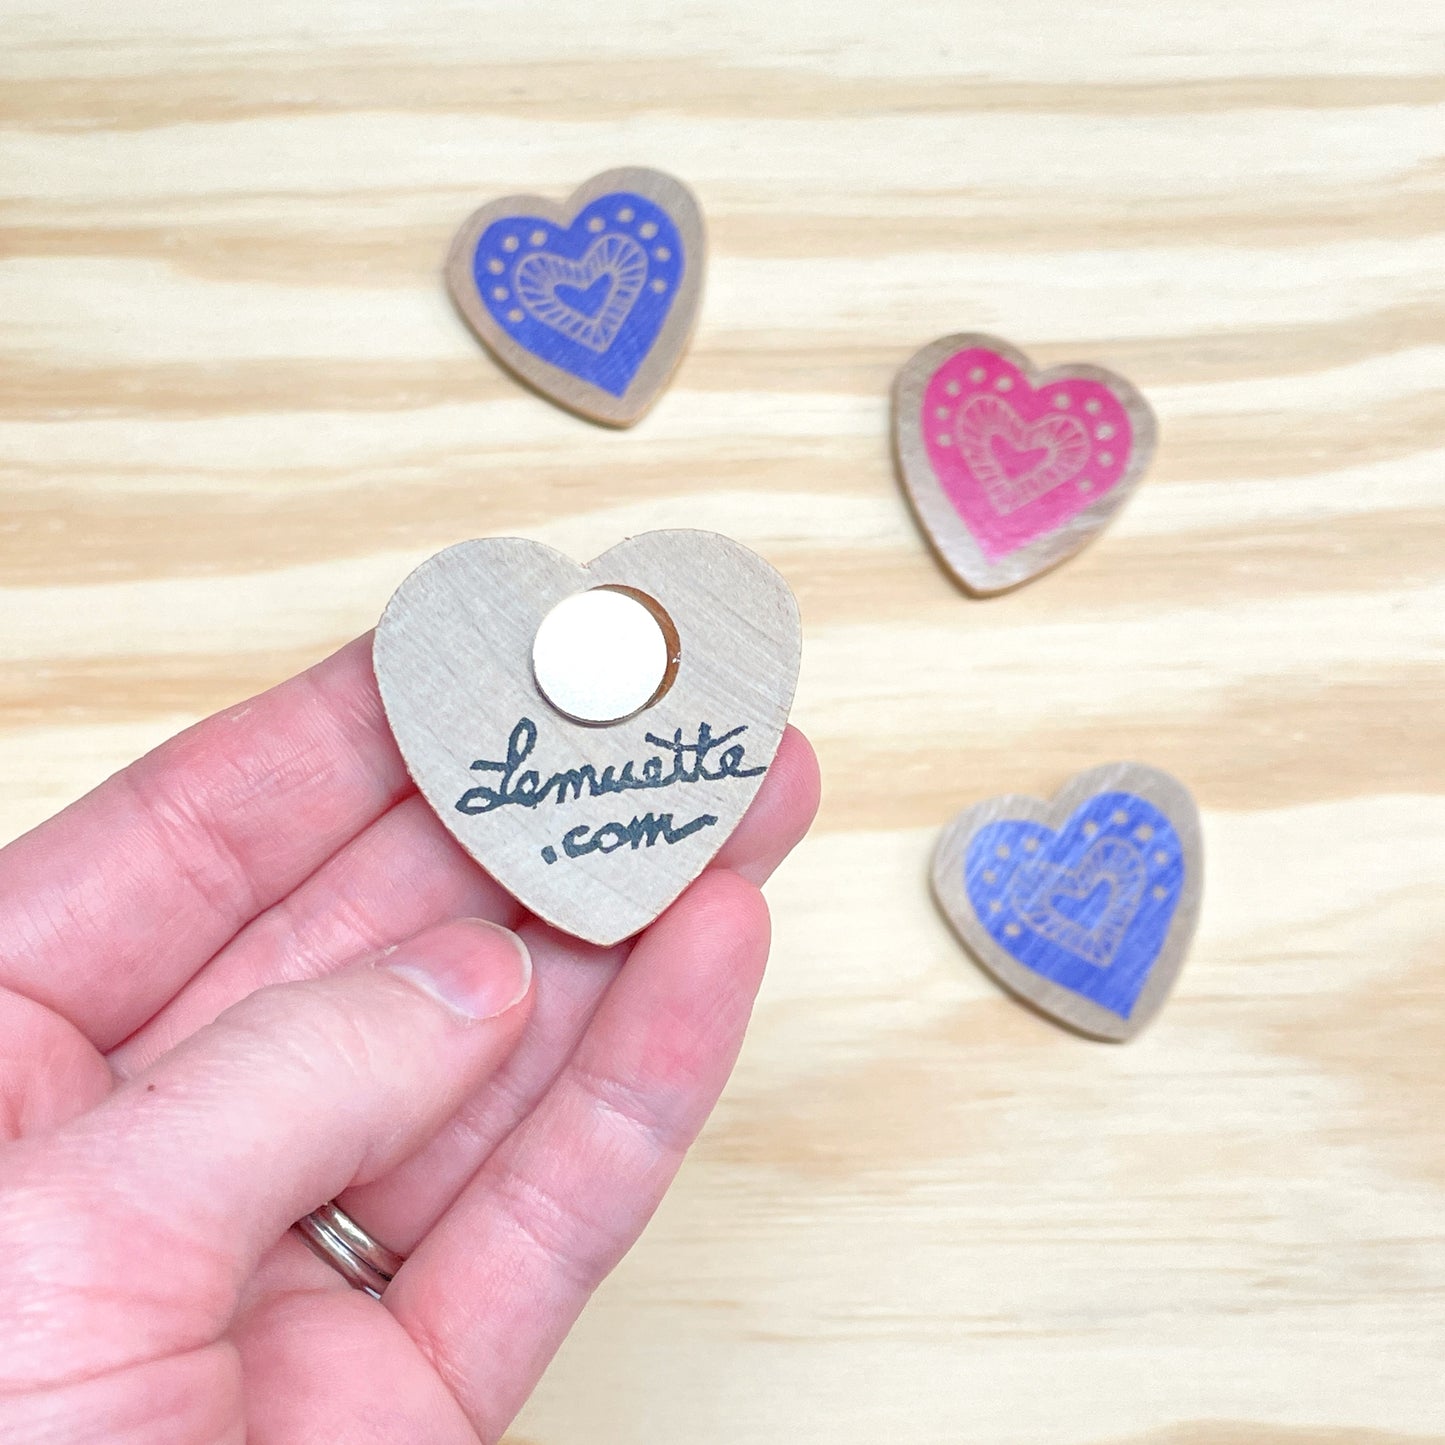 Heart Magnets - hand stamped wood (set of 4)